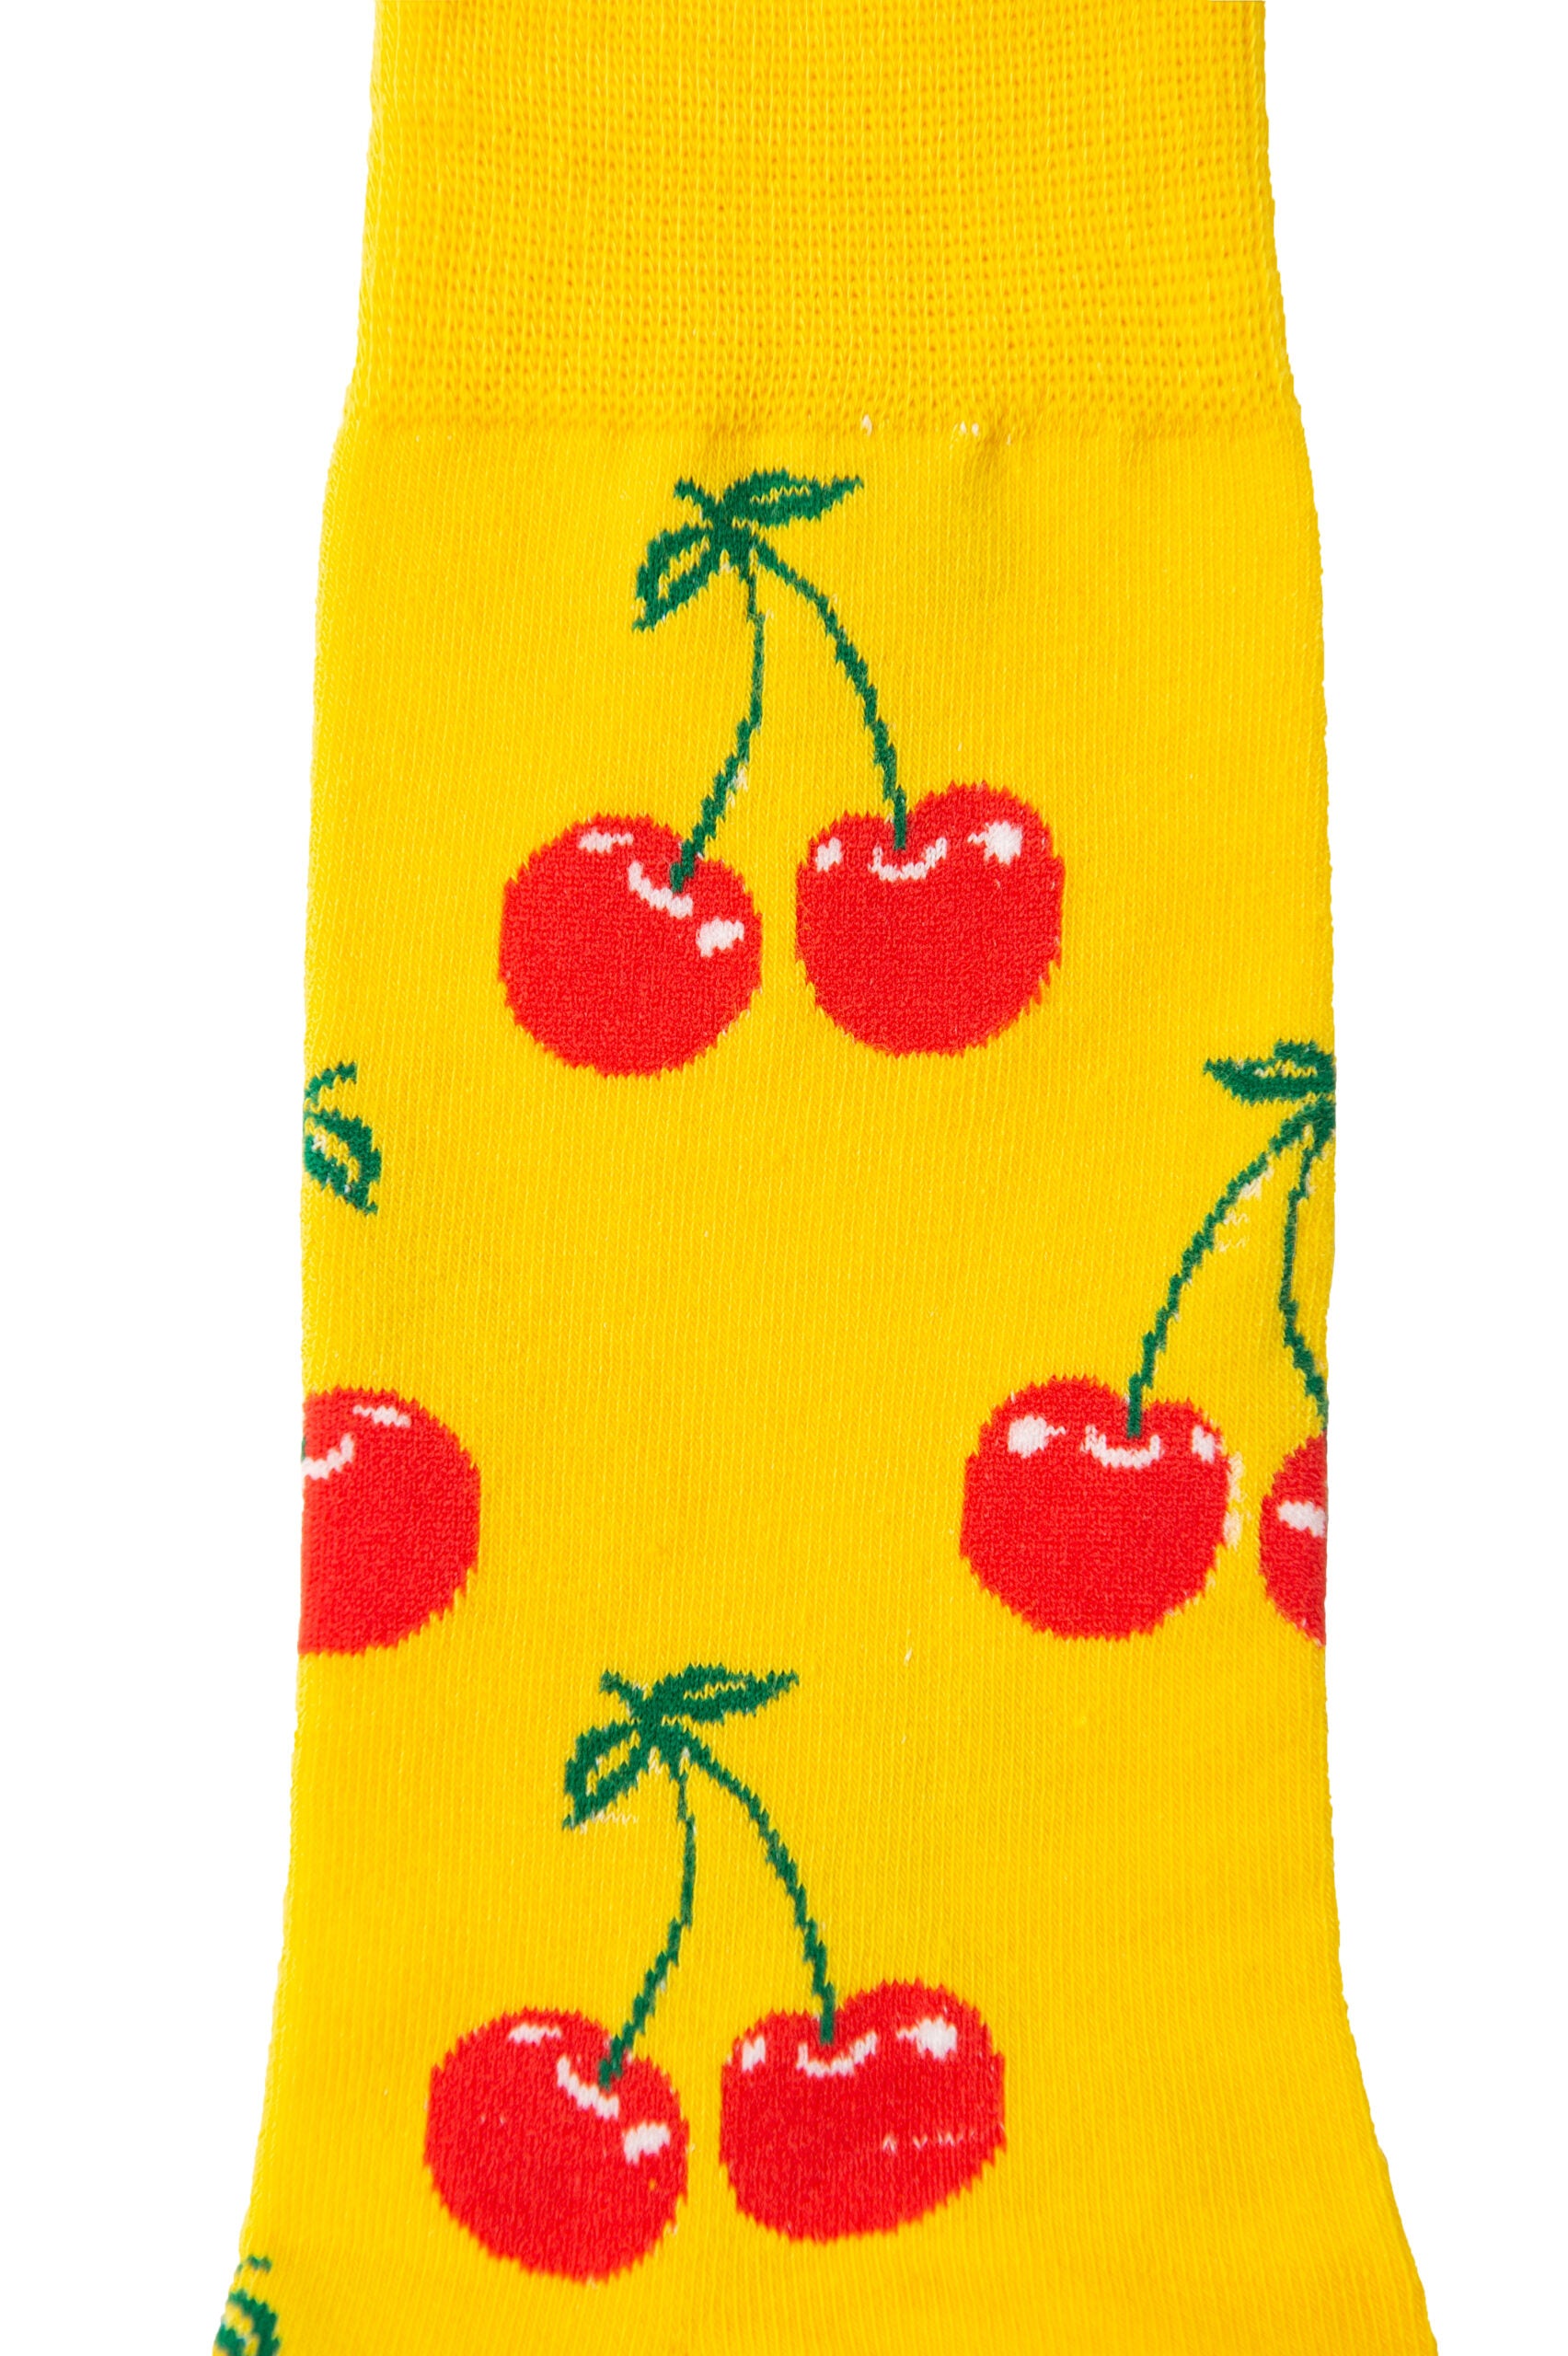 A yellow sock with Cherry Socks on it.